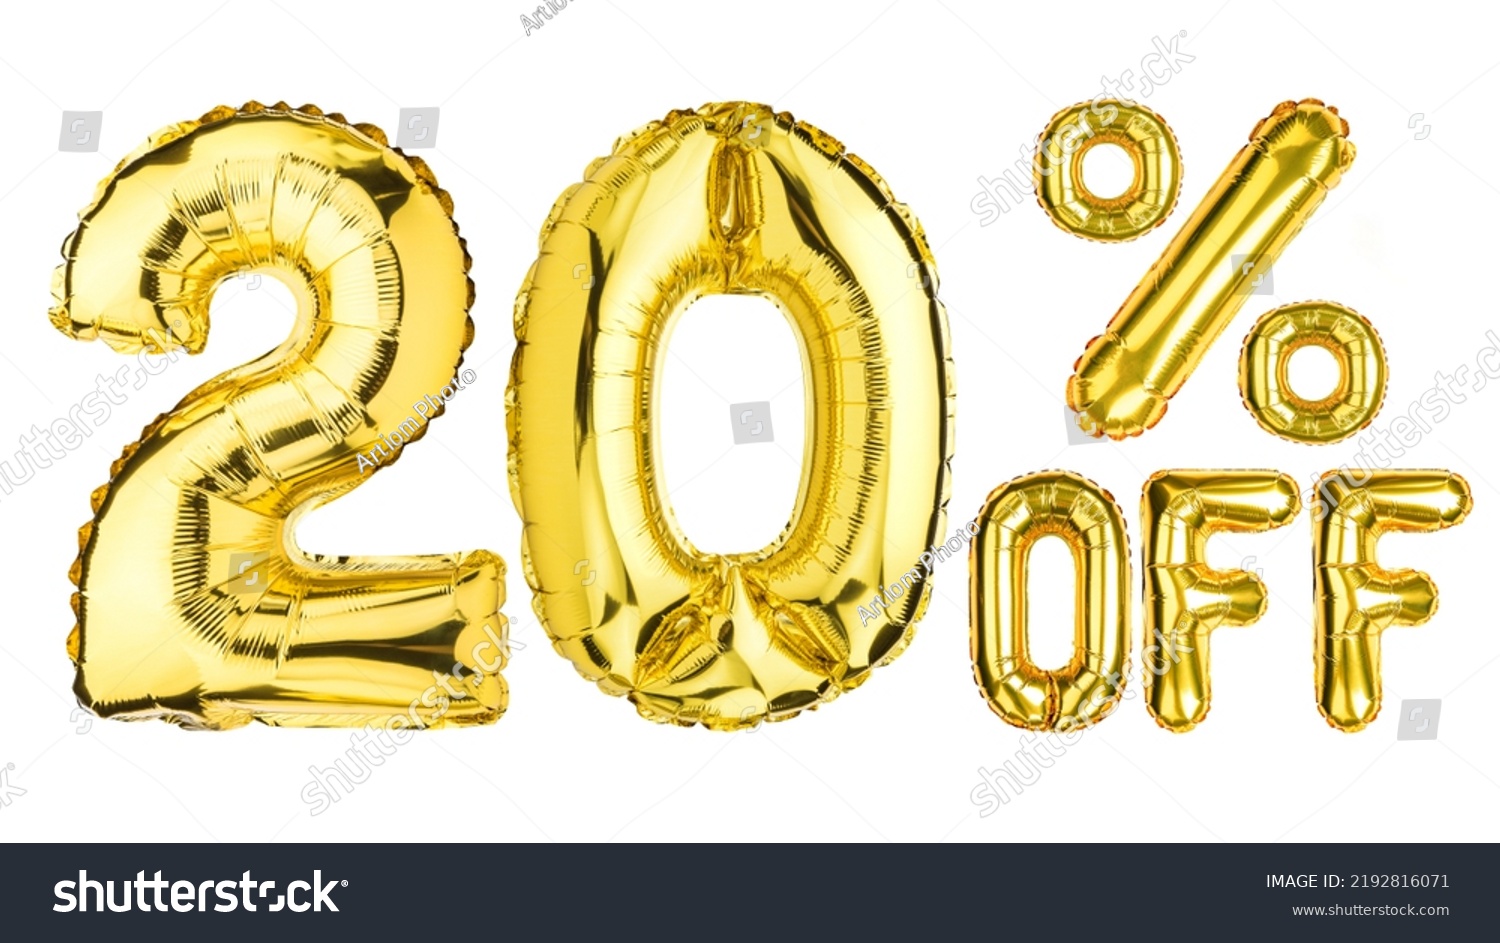 20 Twenty Percent % Off balloons. Sale, Clearance, discount. Yellow Gold foil helium balloon. Word good for store, shop, shopping mall. English Alphabet Letters. Isolated white background. #2192816071